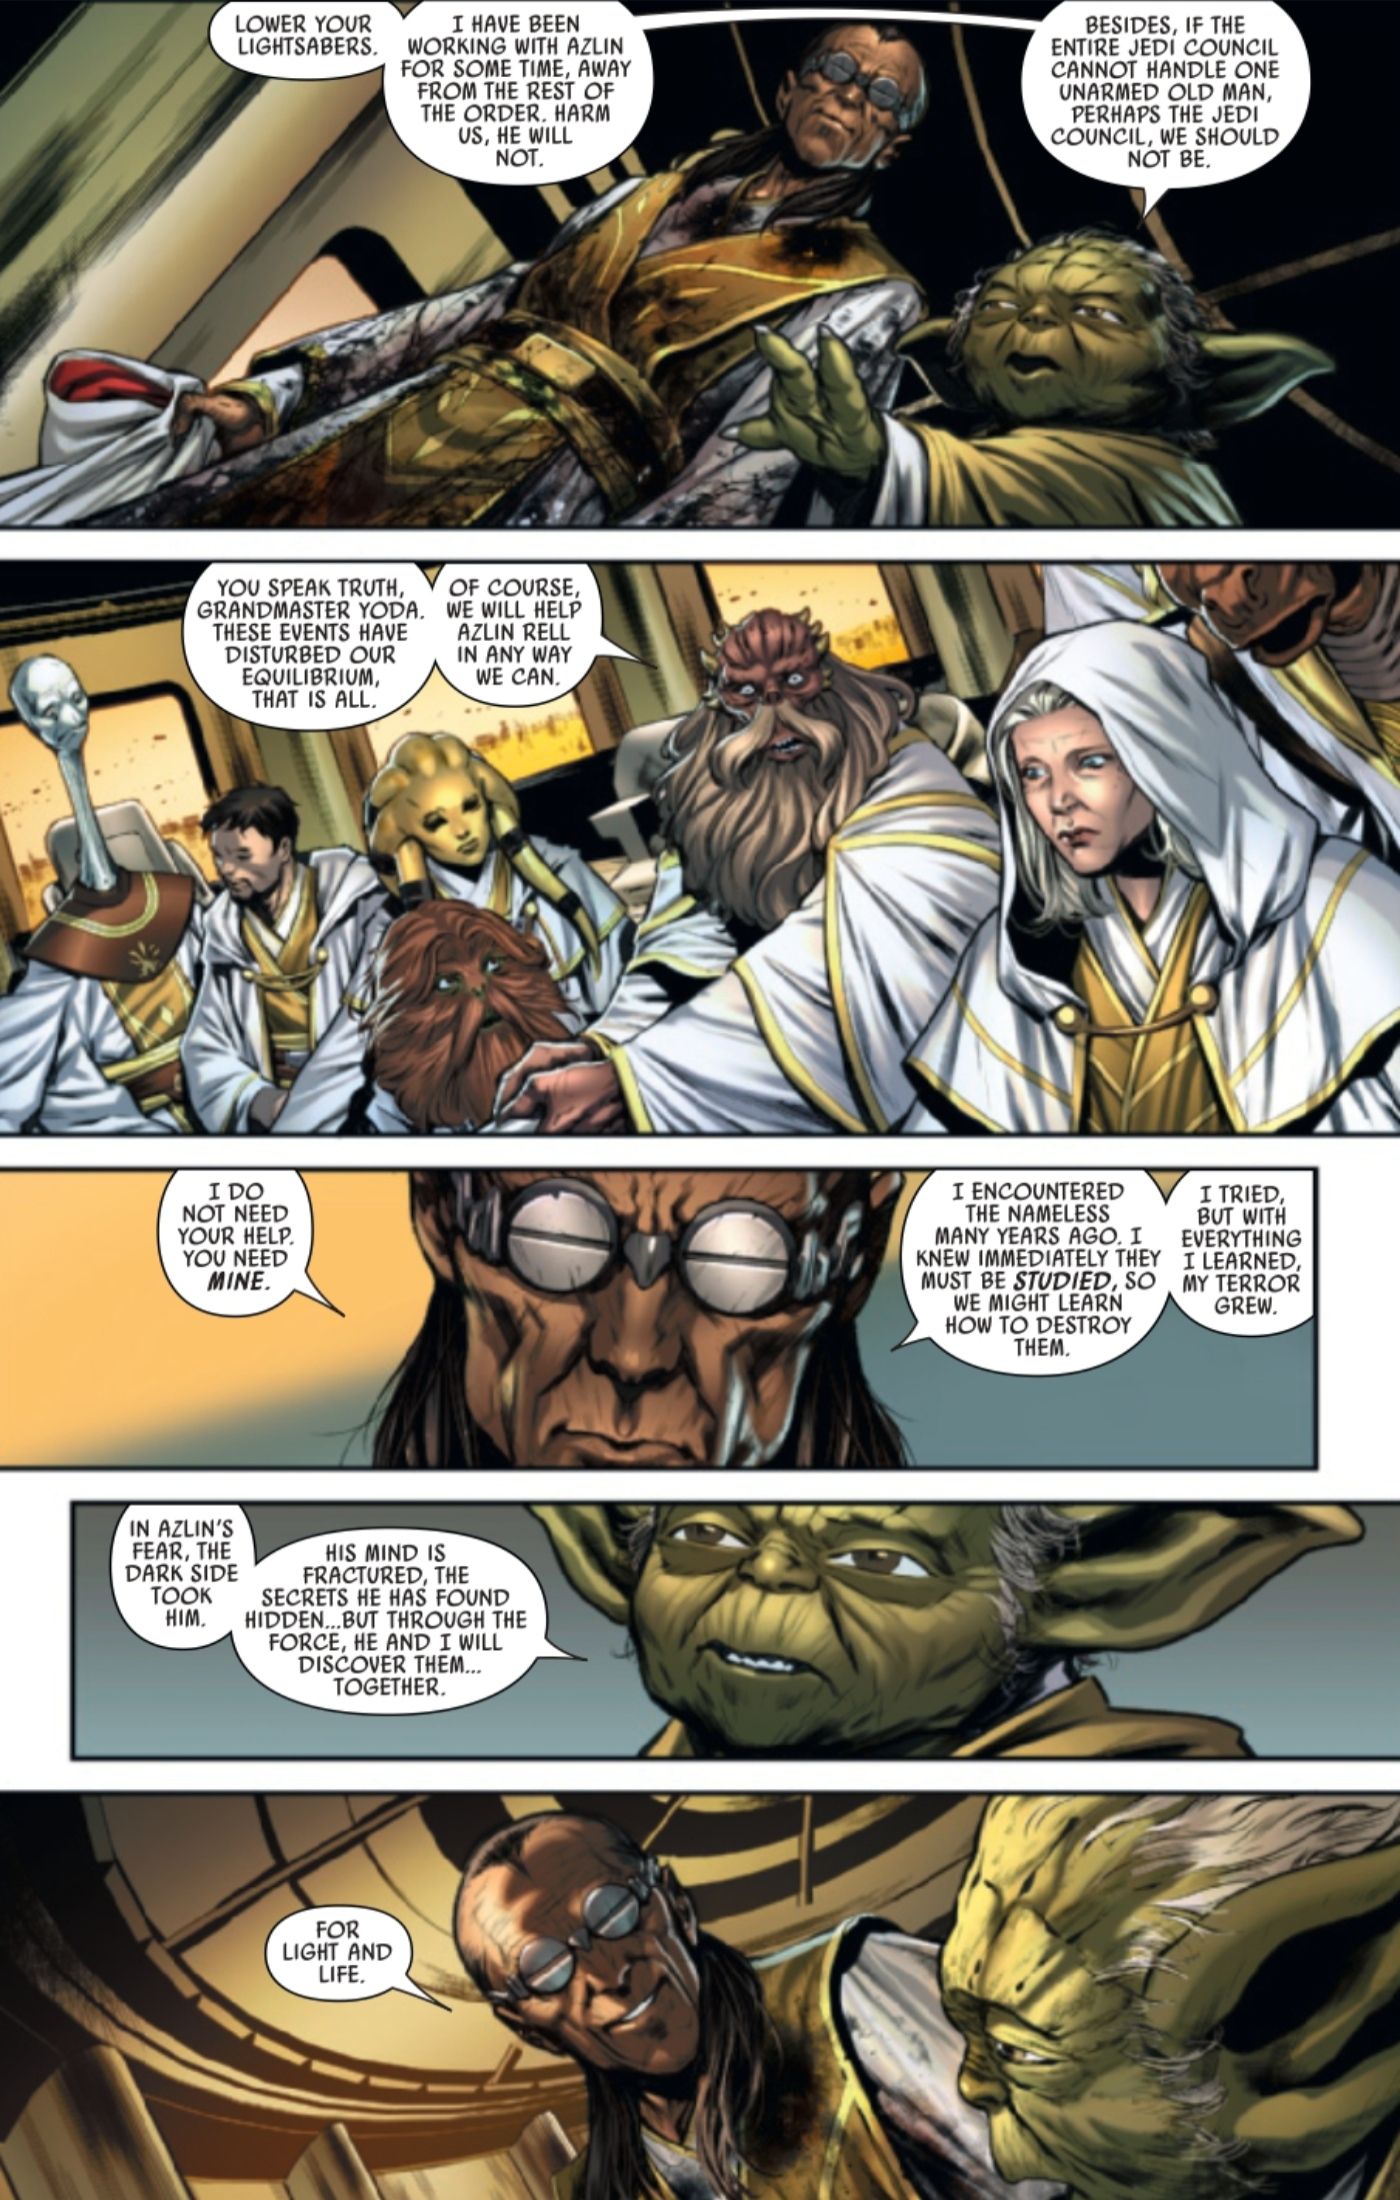 Yoda Accidentally Predicted Palpatine’s Rise 200 Years Early (& Why He’d Win)